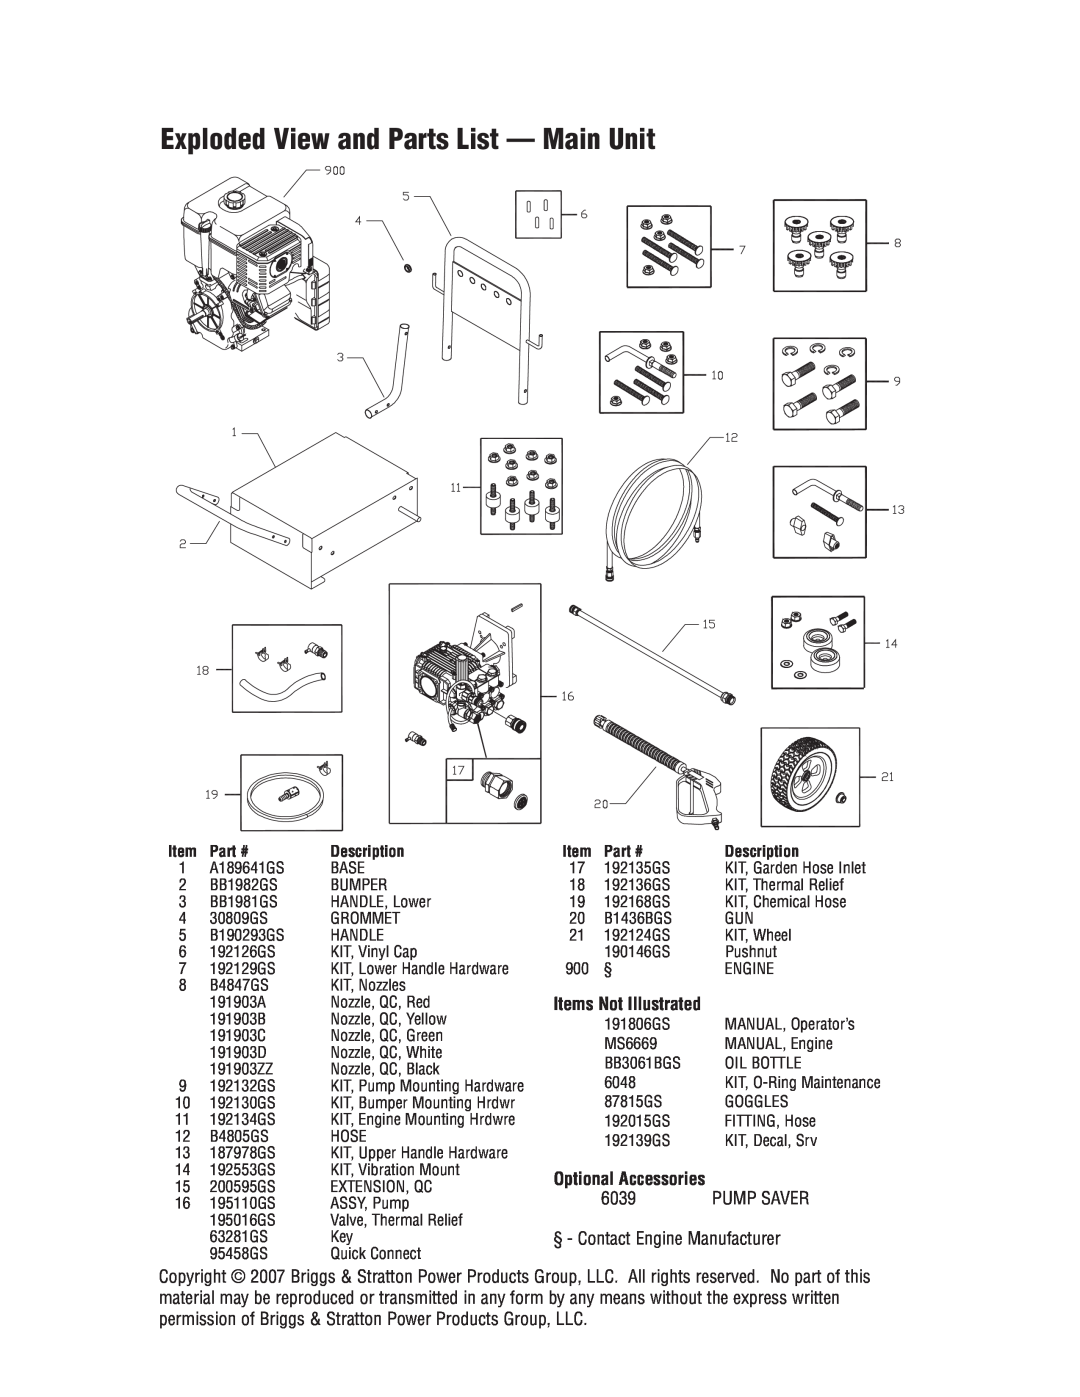 Briggs & Stratton HPP1780-0 Exploded View and Parts List - Main Unit, Description, Items Not Illustrated, 6039, Pump Saver 